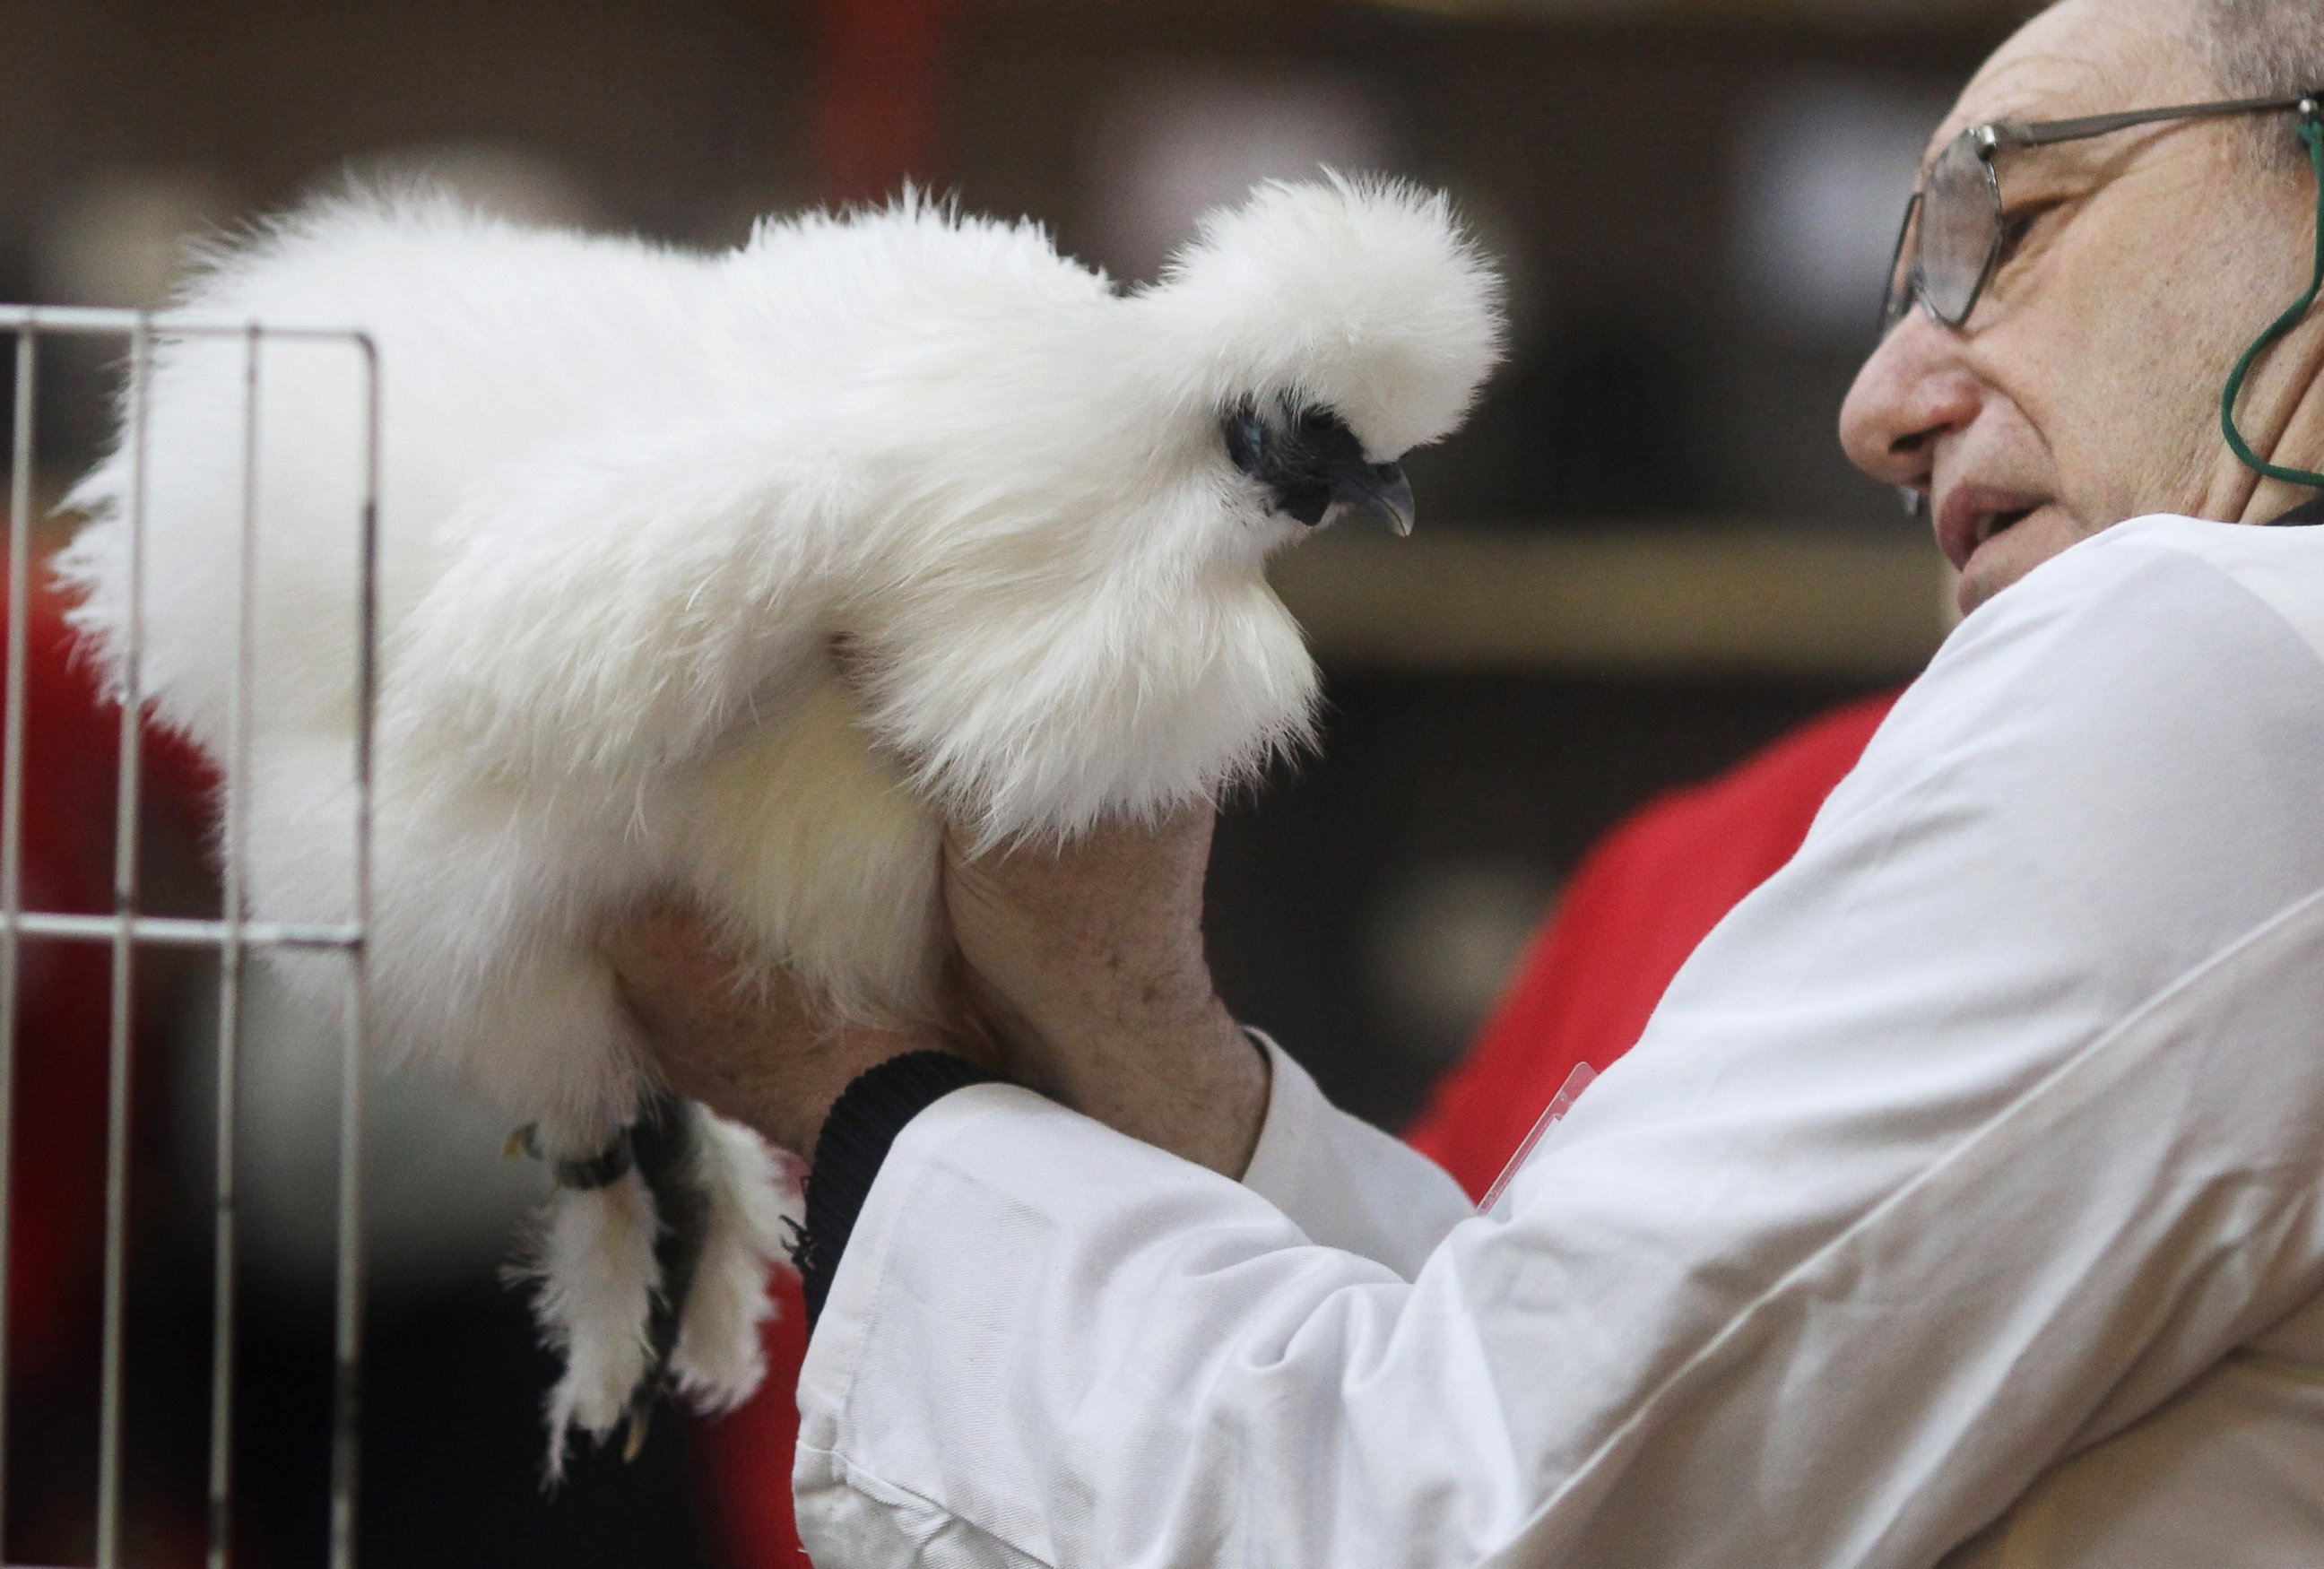 PHOTO: A judge views a White Silkie at the Scottish National Poultry Show in Lanark Market on January 22, 2011 in Lanark, Scotland. 